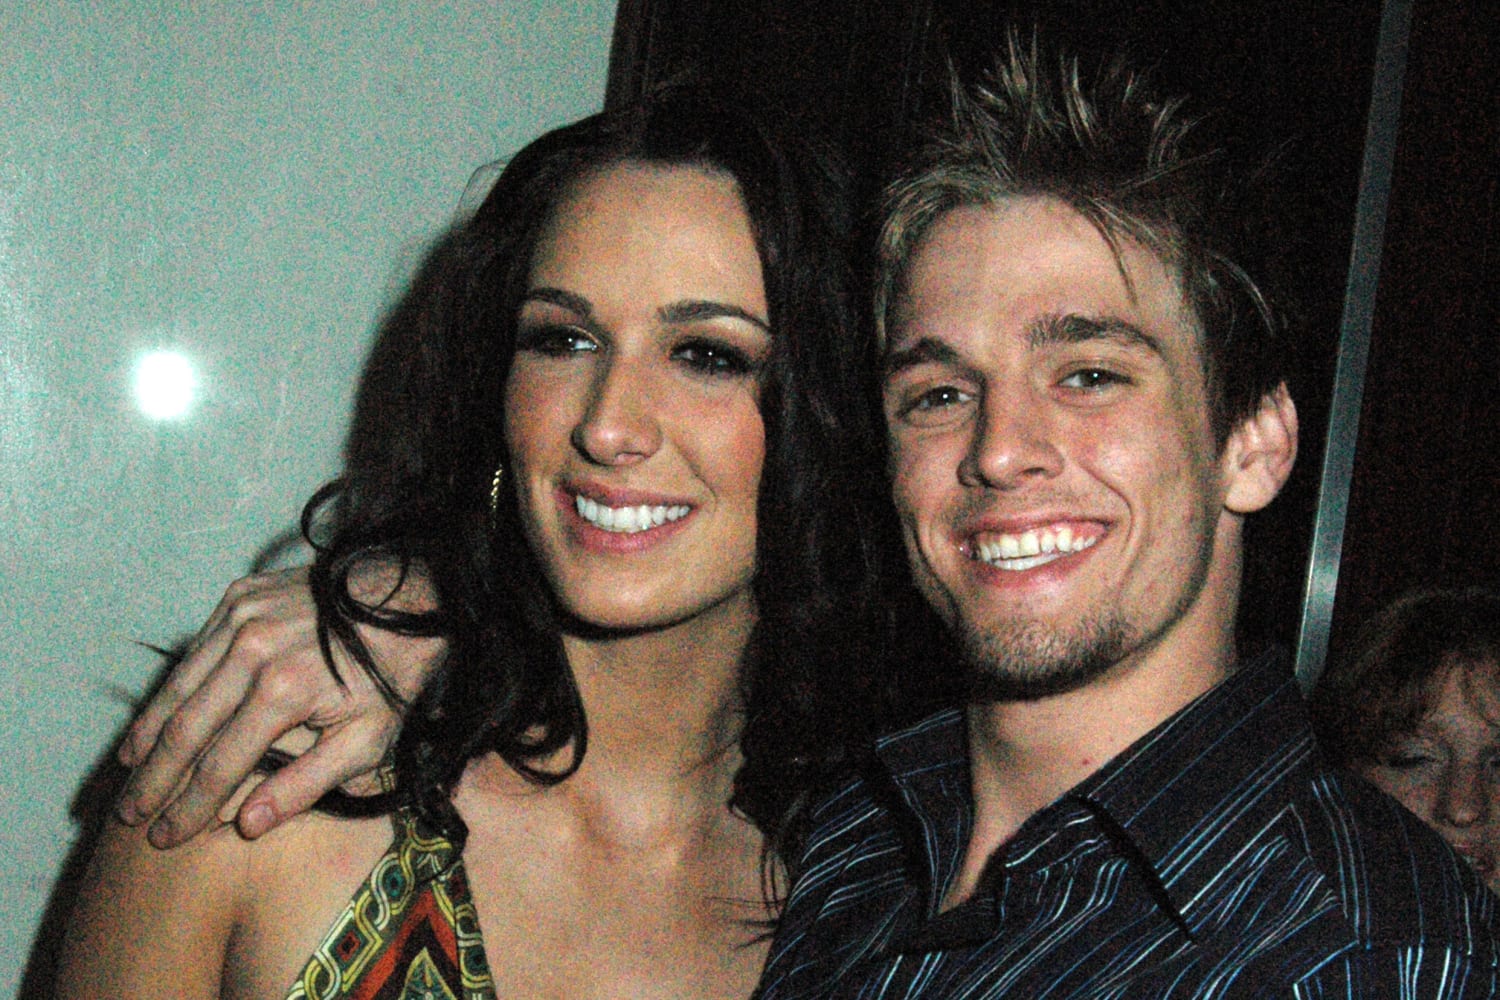 Aaron Carter’s siblings say they hope singer is now at ‘peace’ following tragic death